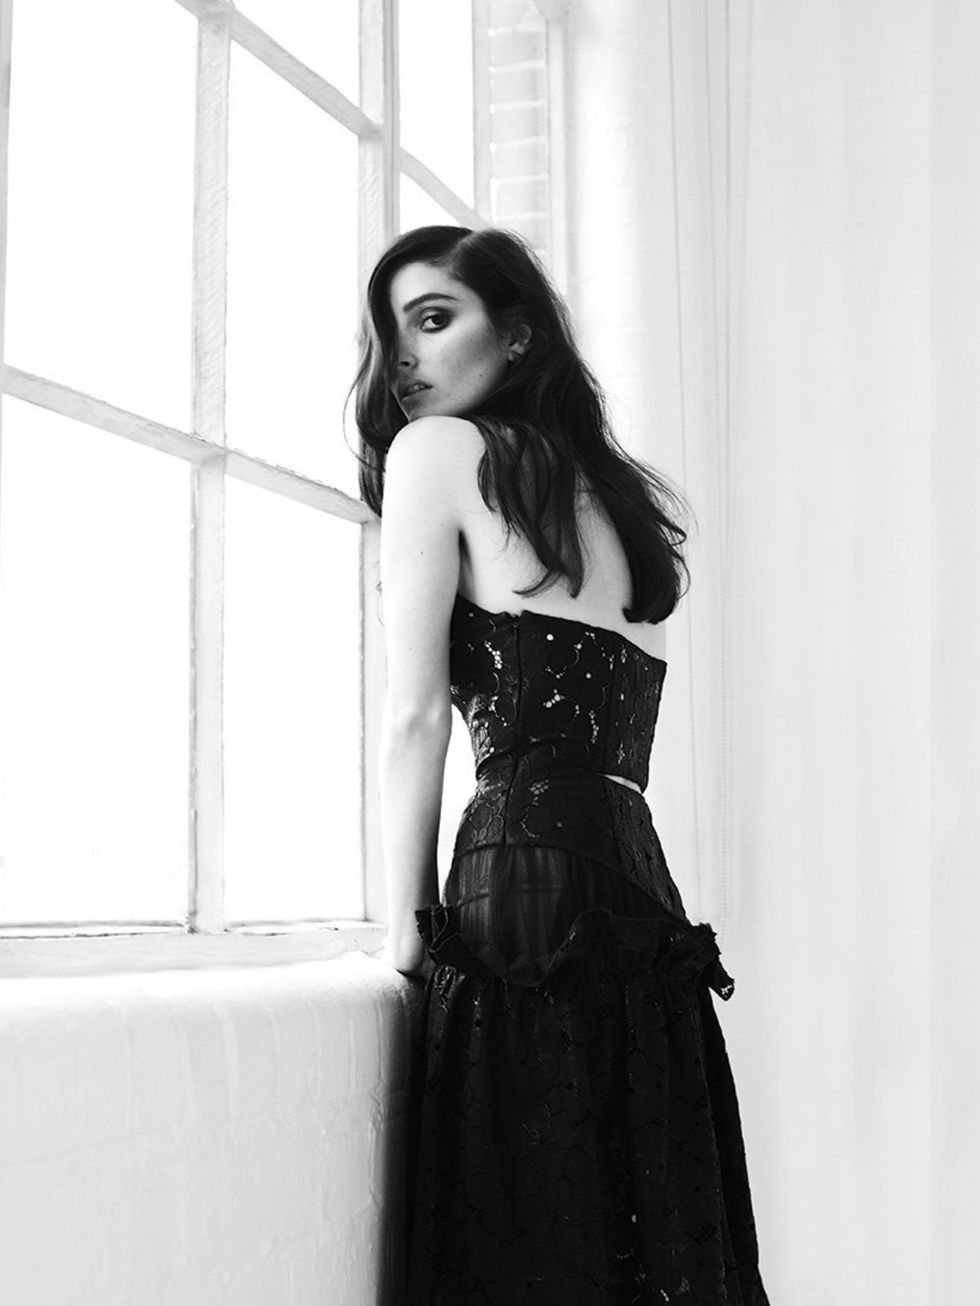 <p>BANKS:</p><p>With a sound that is 'moody, intimate and R&amp;B-inspired' when we met and shot BANKS here in London for <a href="http://on.elleuk.com/1kluVhj">this month's issue of ELLE</a>, far from her native LA, we fell in love. Until she releases he